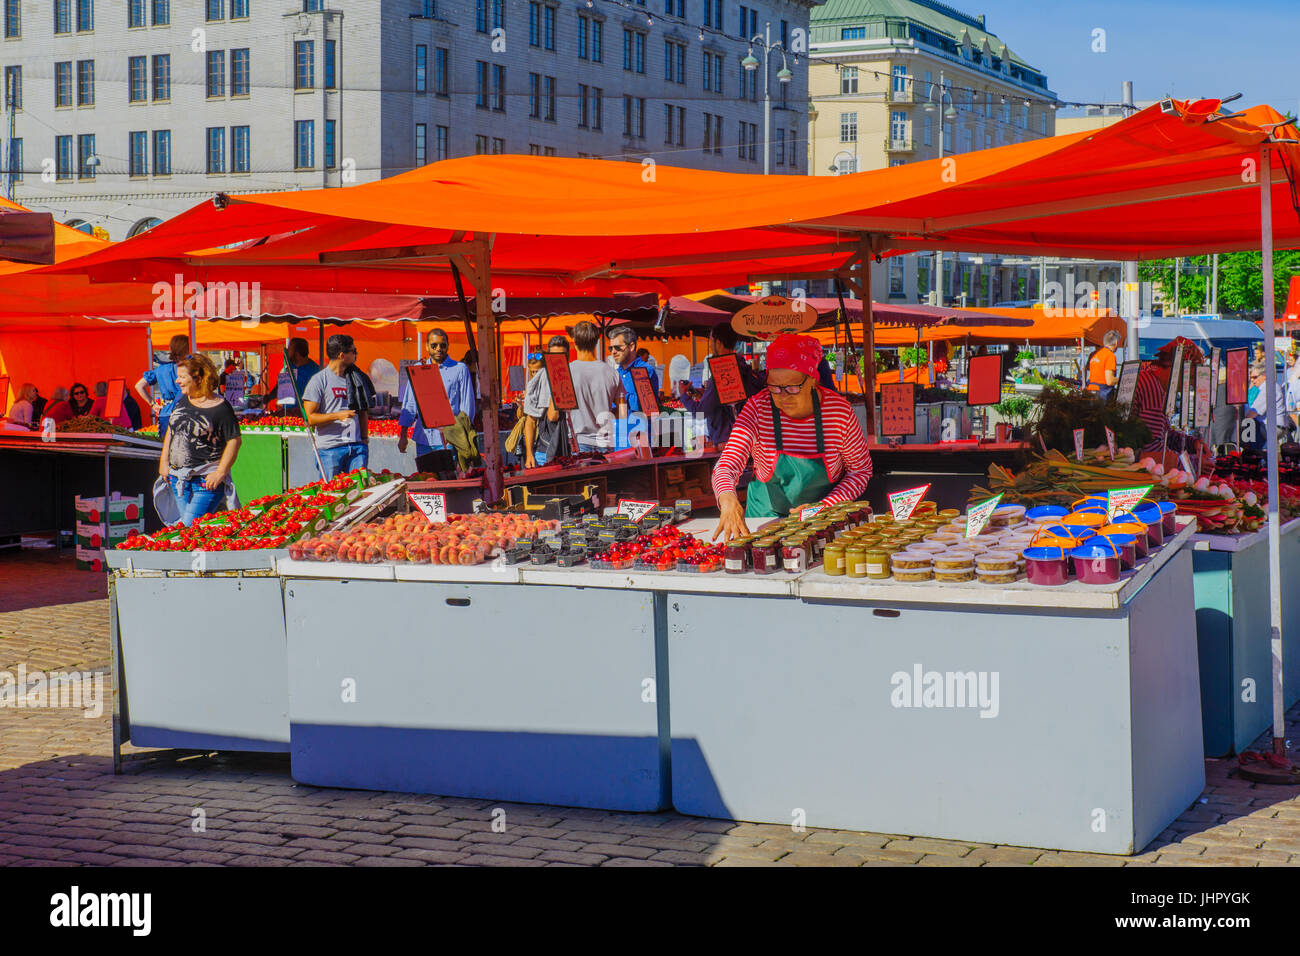 HELSINKI, FINLAND - JUNE 16, 2017: Scene of the South Harbor Market Square, with locals and visitors, in Helsinki, Finland Stock Photo